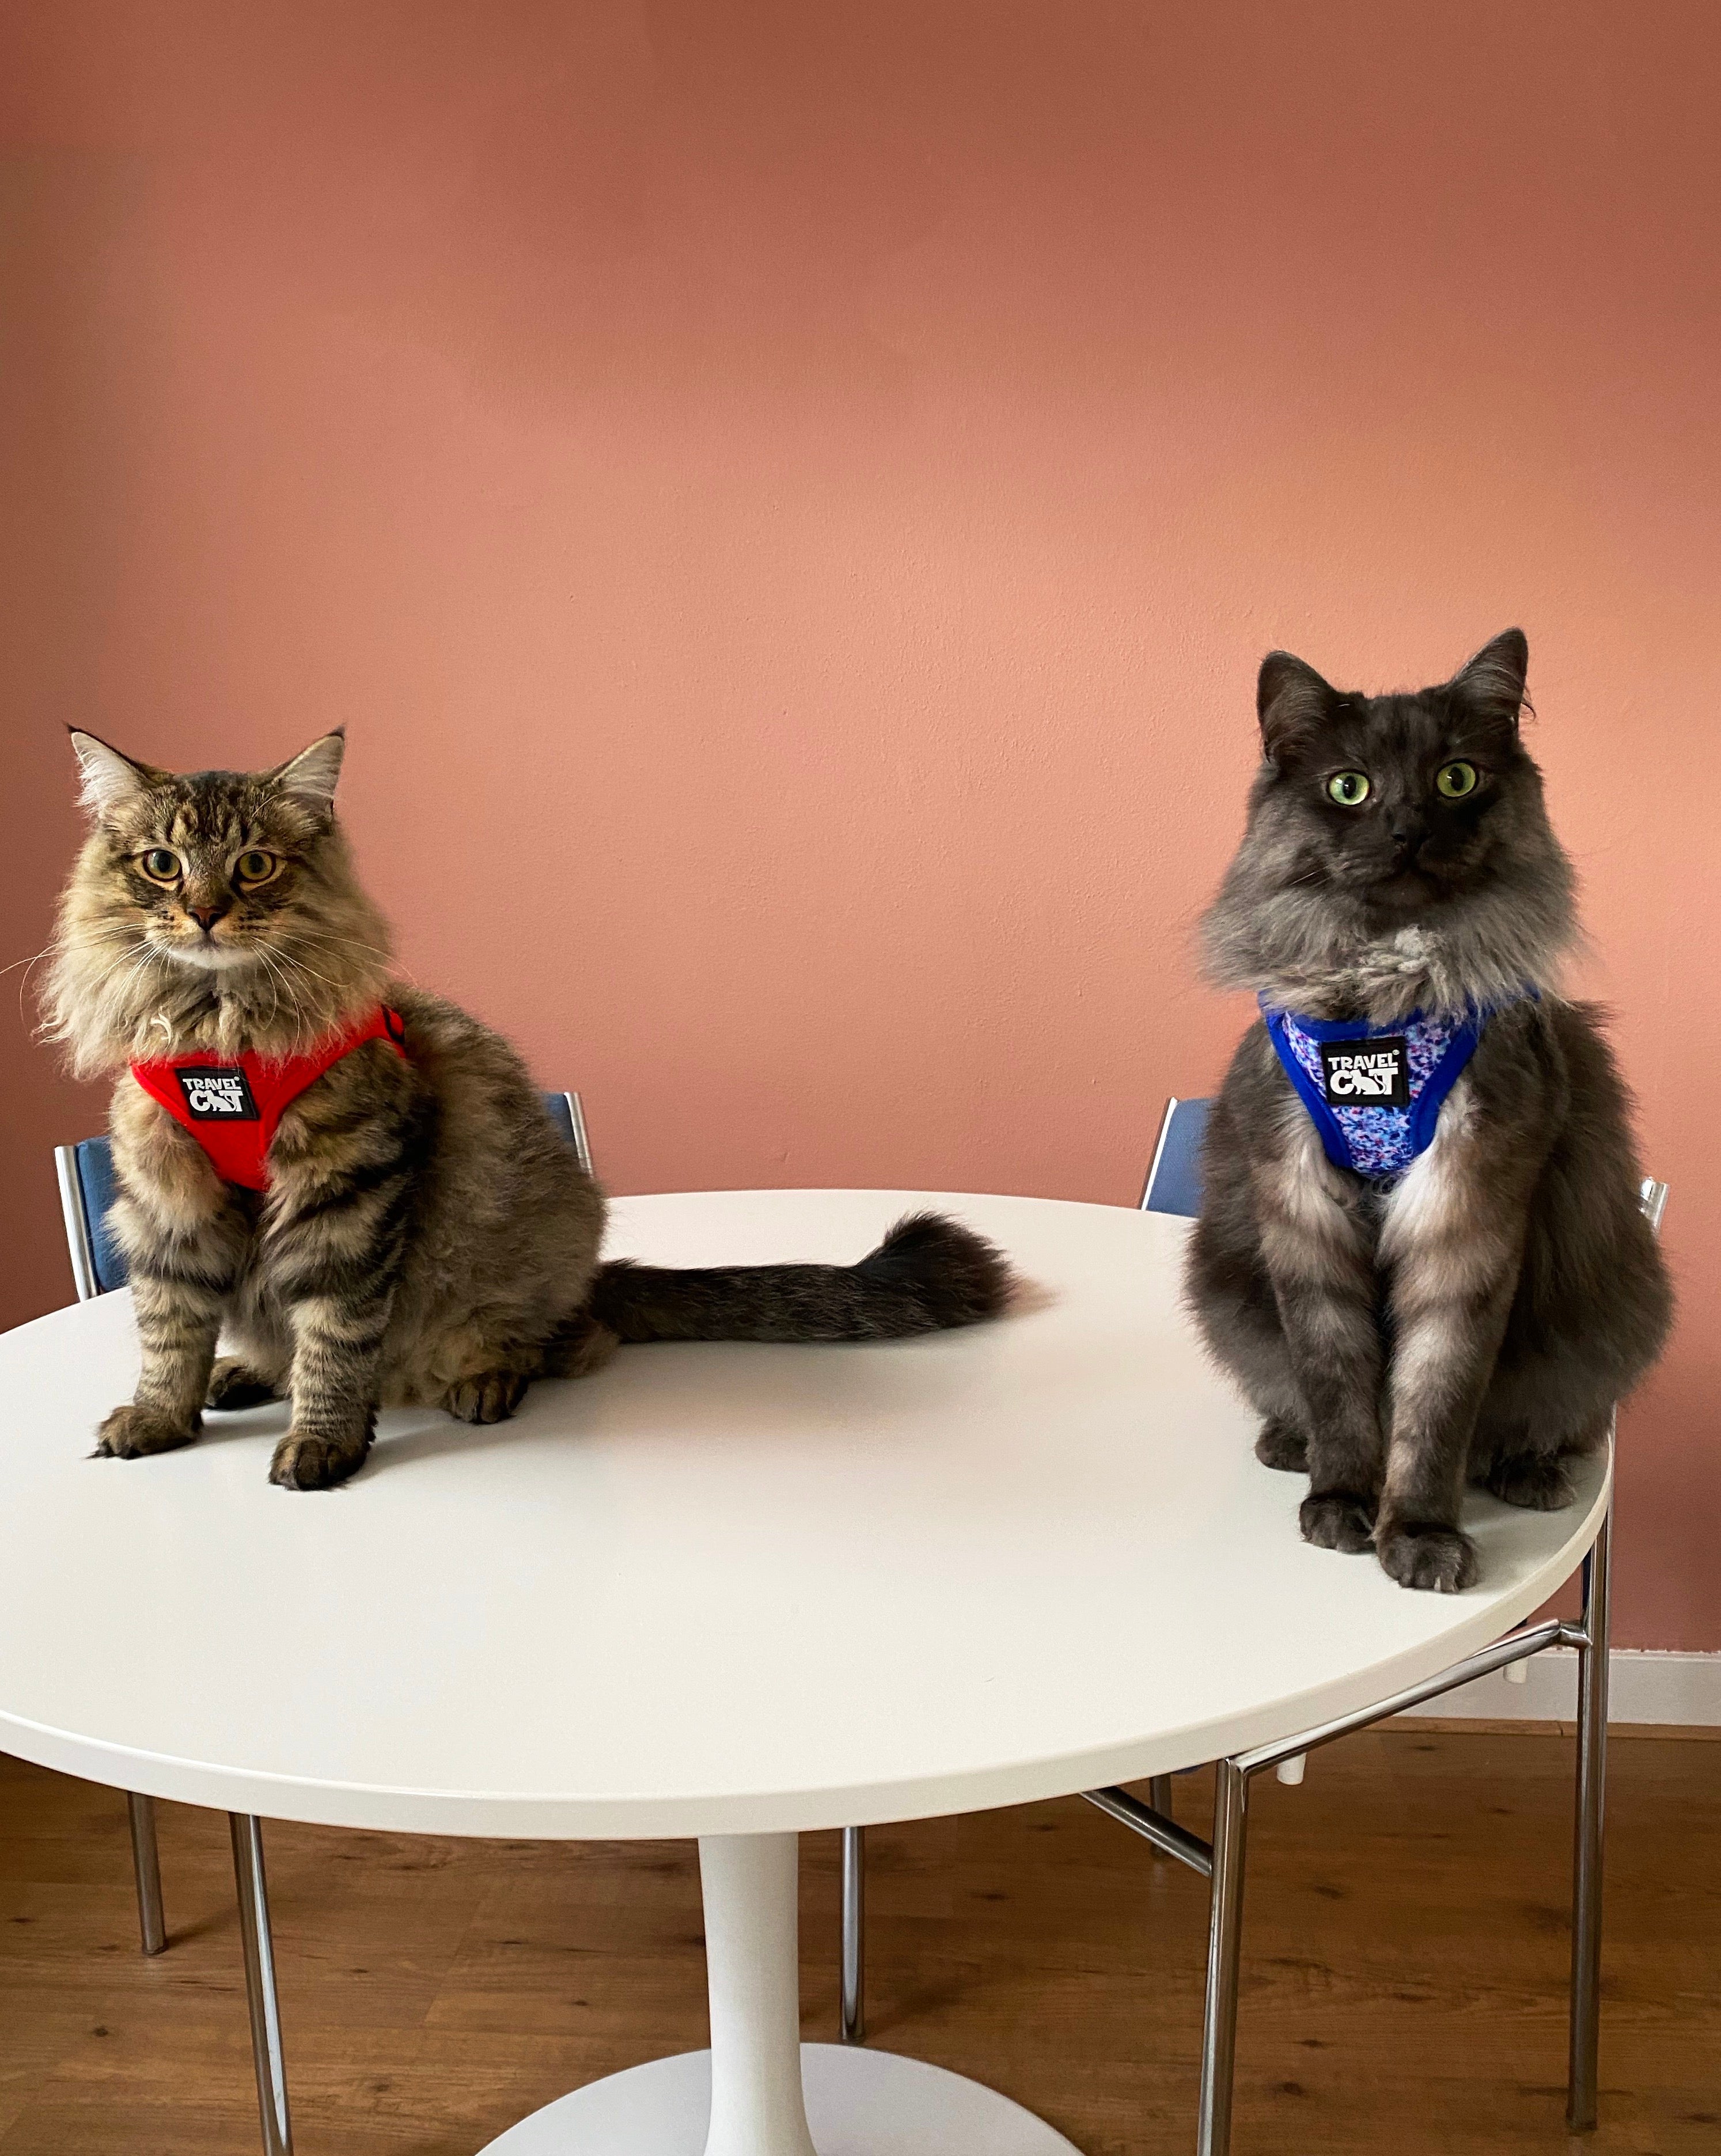 Travel Cat Tuesday: Meet Otje & Pluk, Ragdoll Brothers from Amsterdam